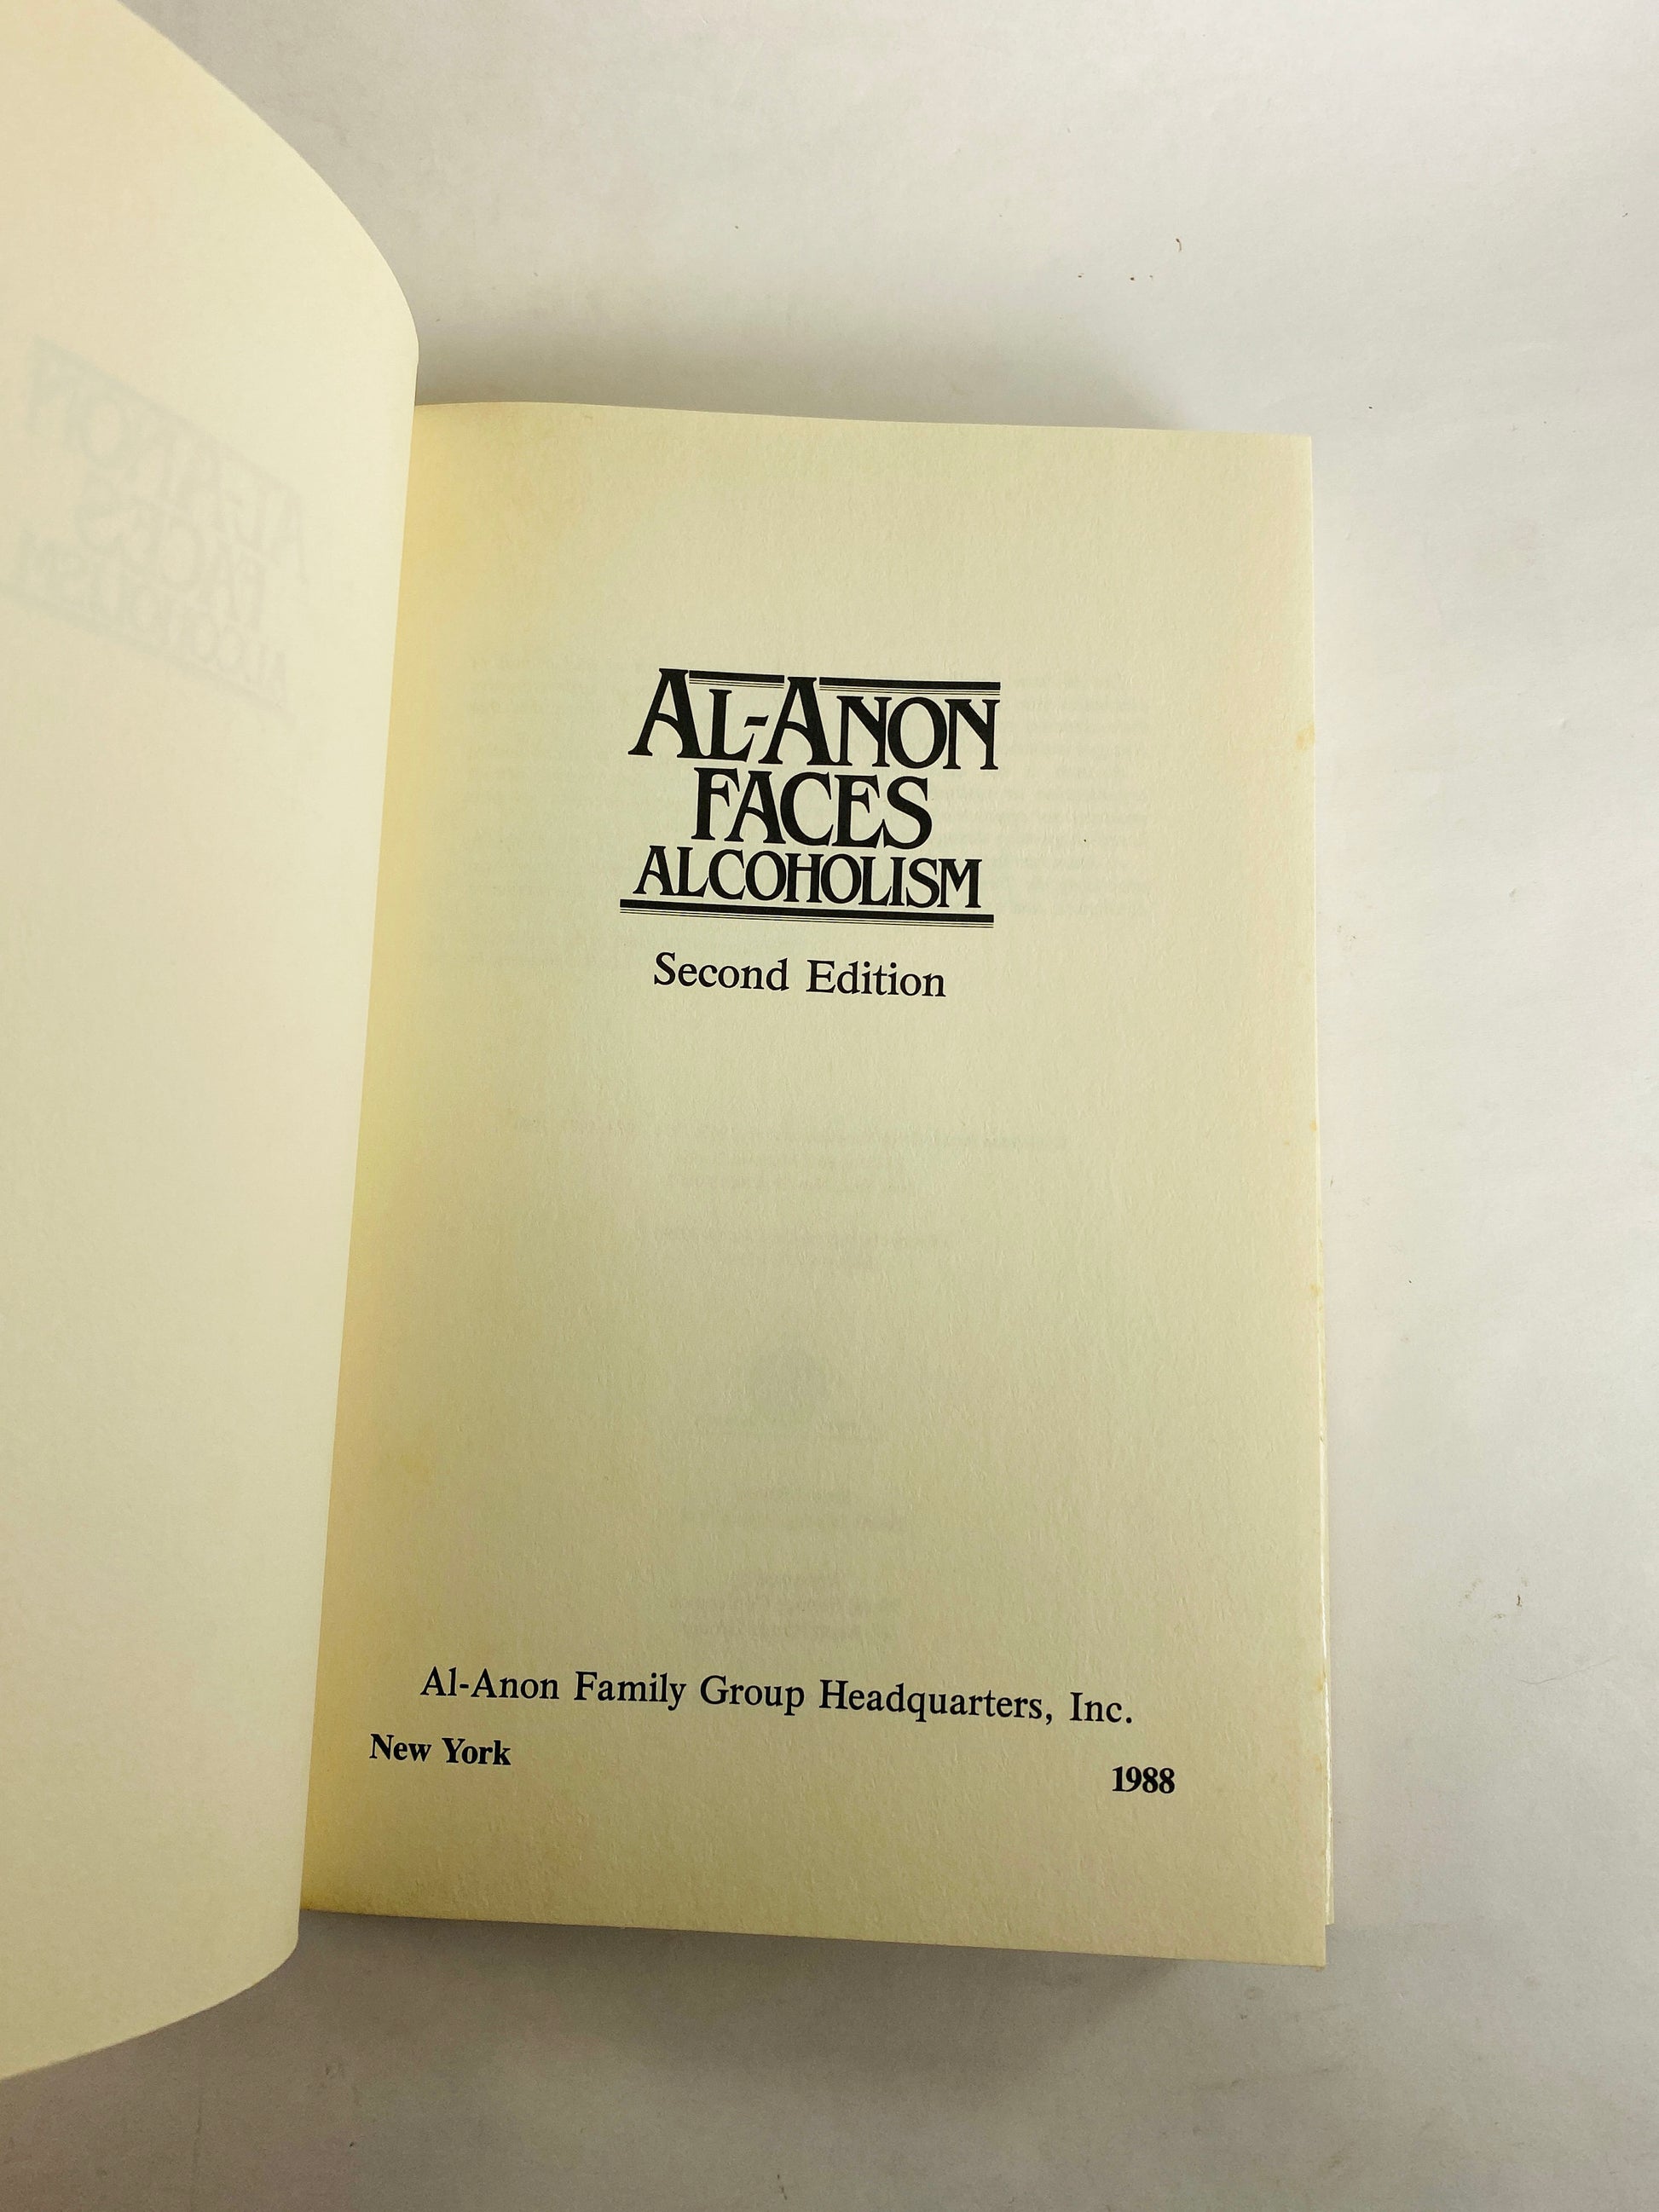 Al-Anon Faces Alcoholism vintage AA book with dust jacket circa 1984 Second Edition examines the program professionals personal